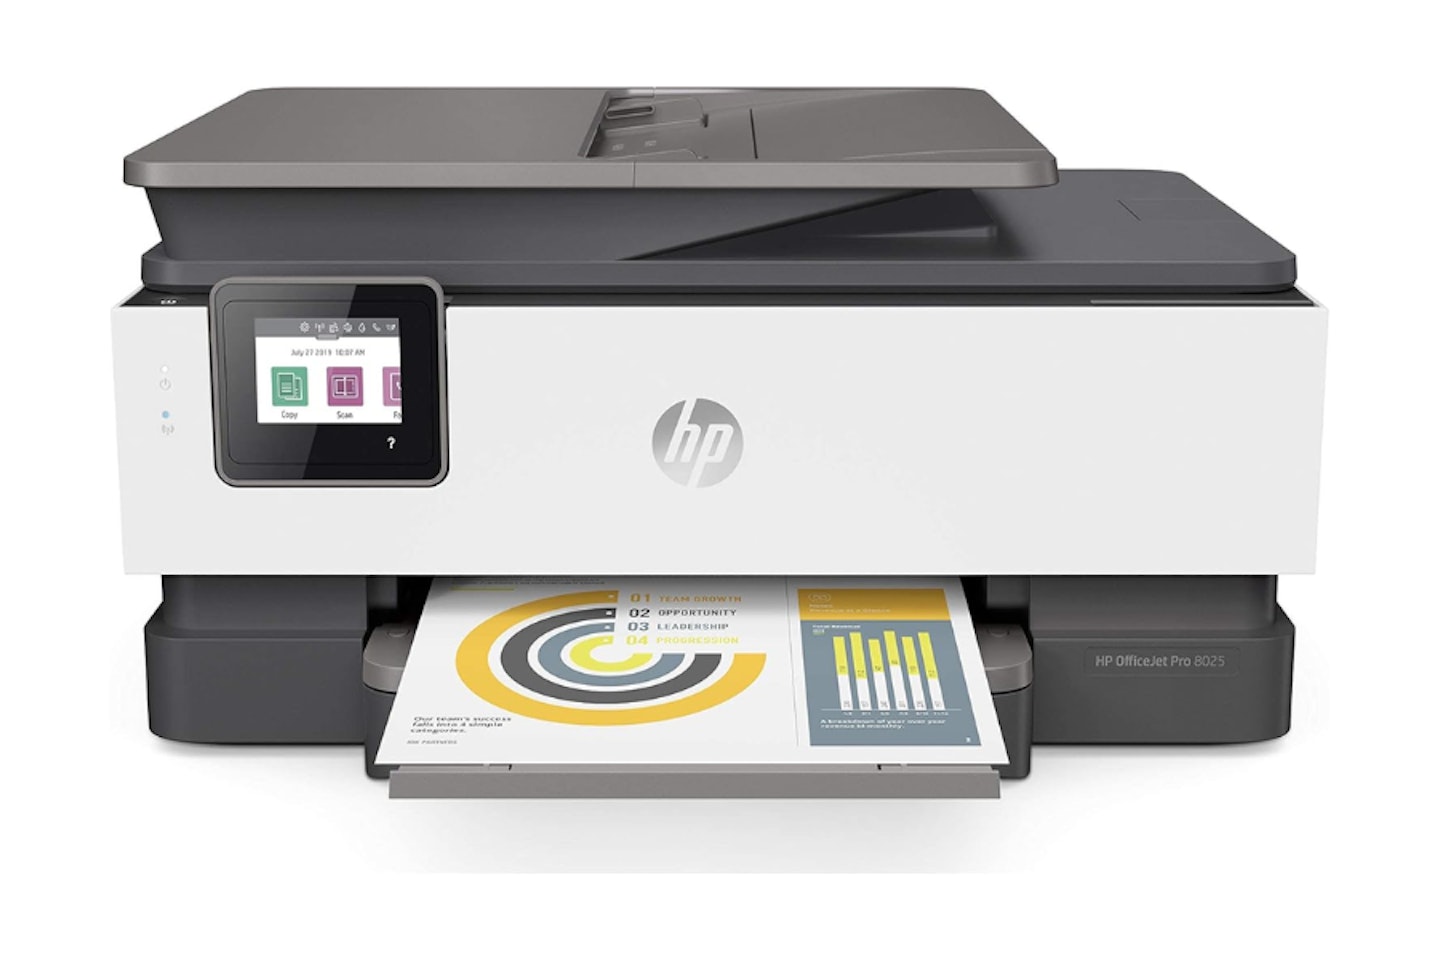 HP OfficeJet Pro 8025 All-in-One Wireless colour printer